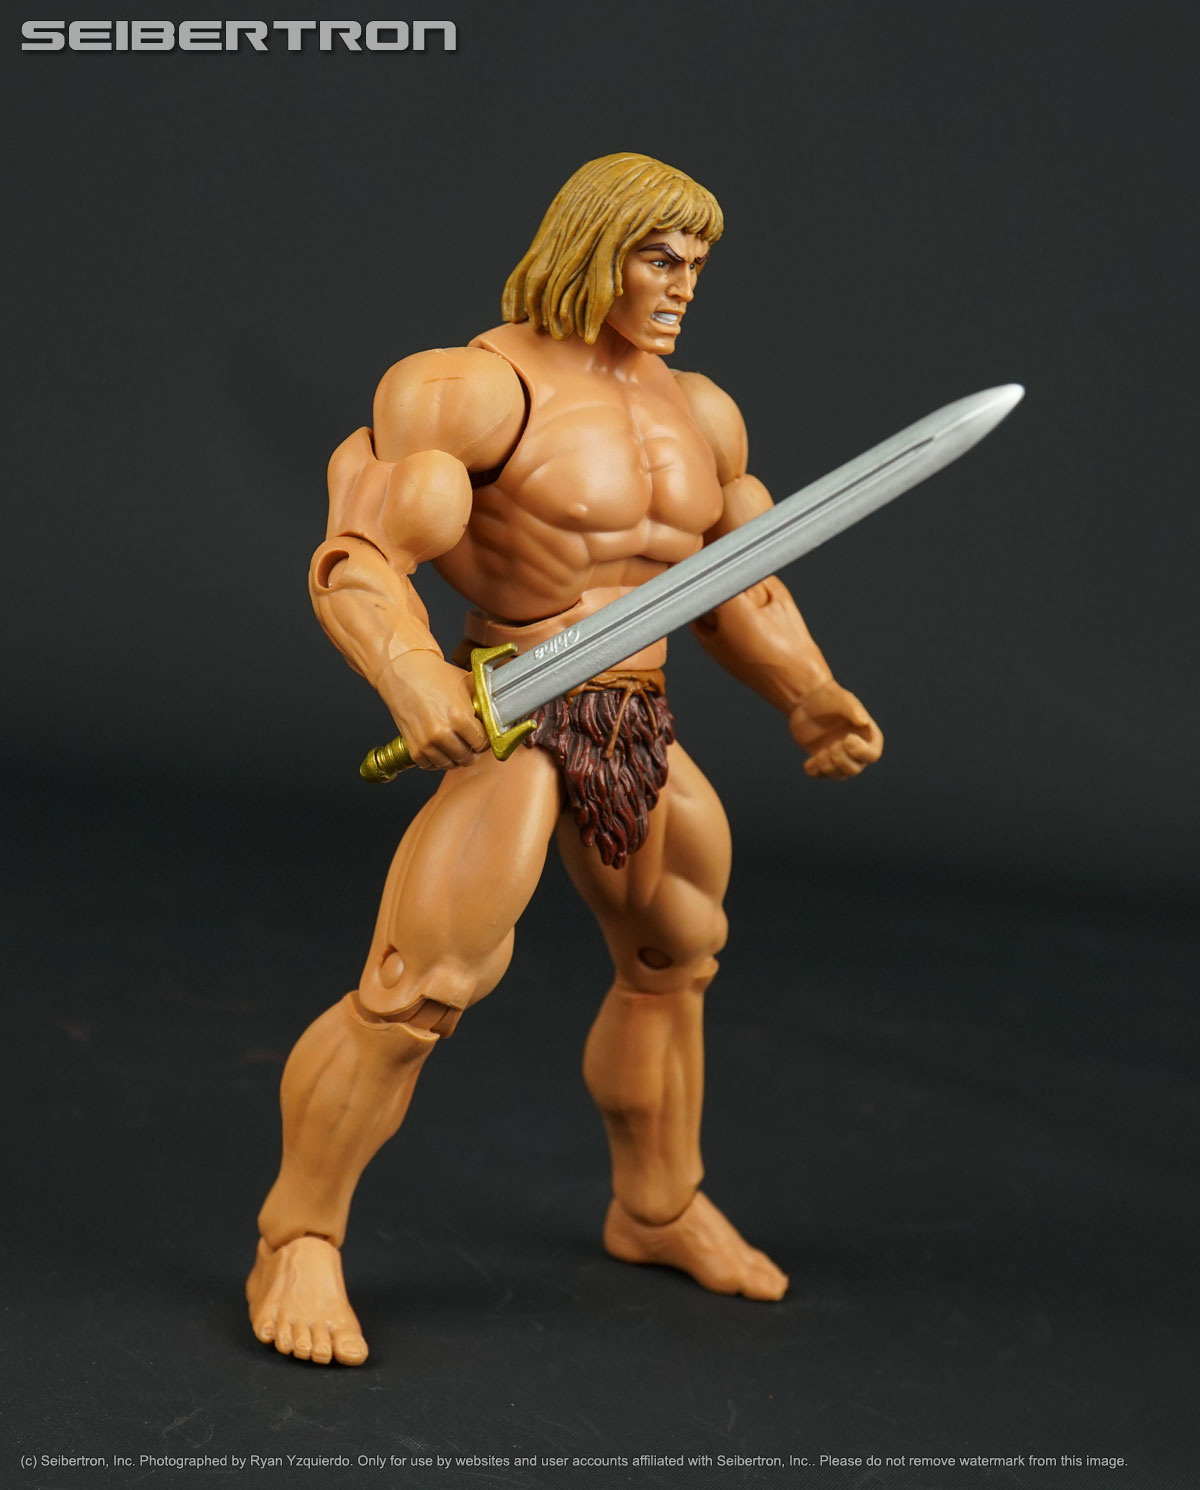 Transformers, Masters of the Universe, Teenage Mutant Ninja Turtles, Gobots, Comic Books, Shopkins, and other listings from Seibertron.com: OO-LARR Masters of the Universe Classics 100% complete MOTUC Savage He-Man HEAD